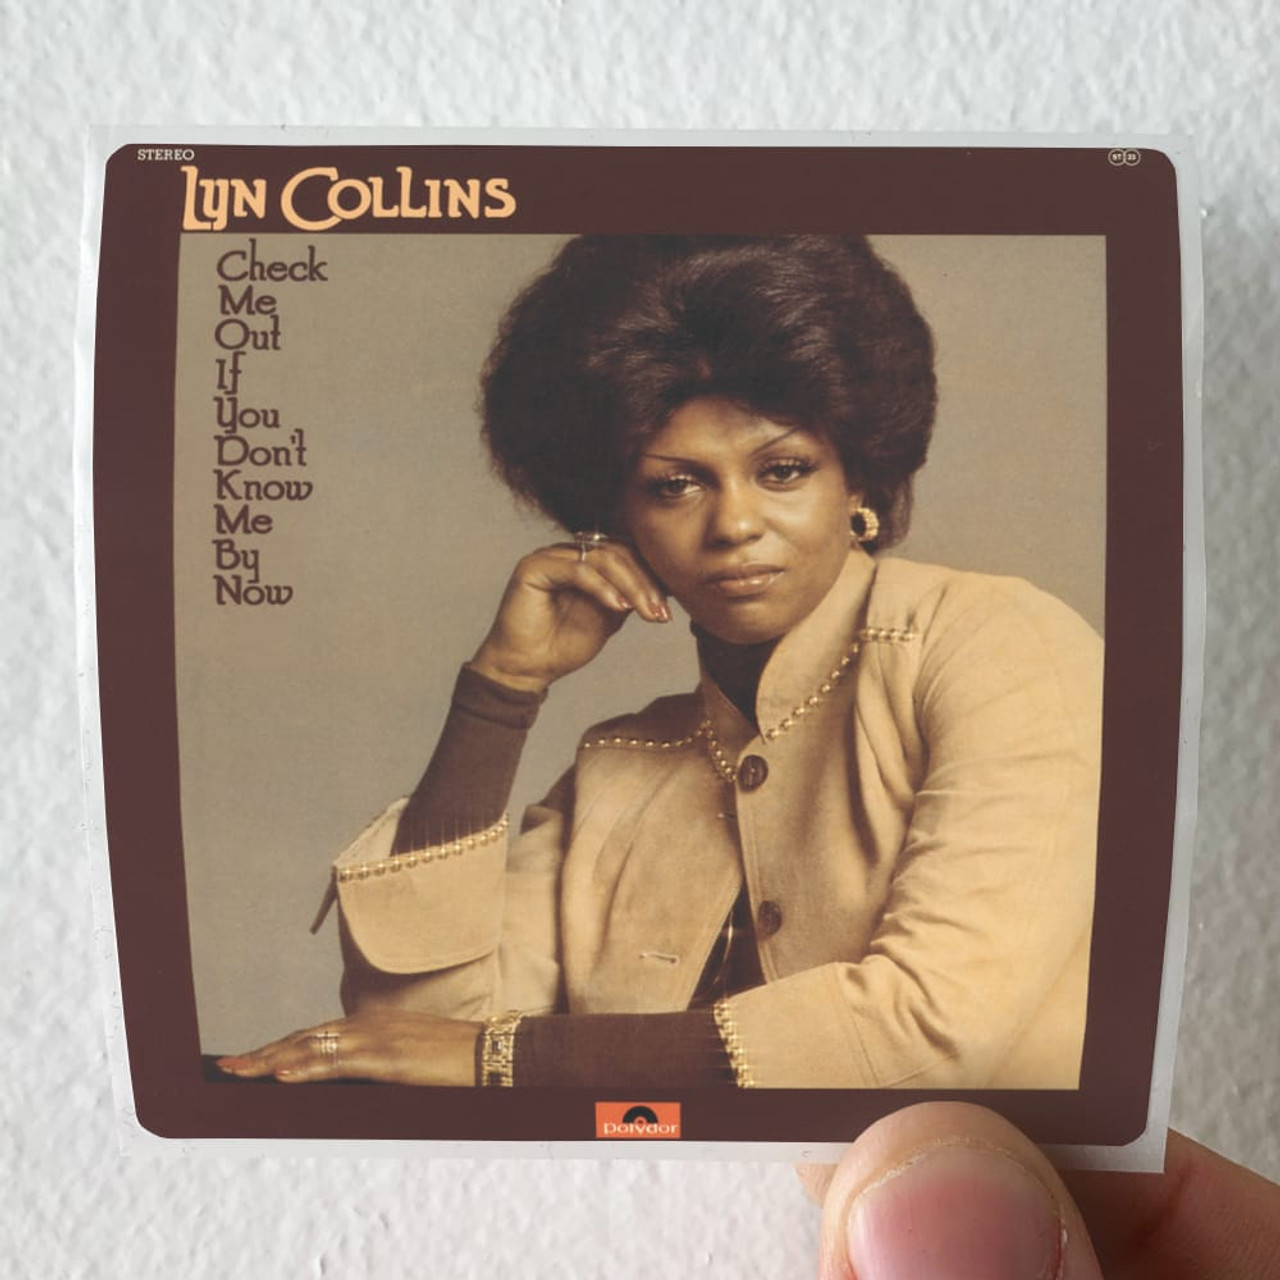 Lyn Collins Check Me Out If You Dont Know Me By Now Album Cover Sticker